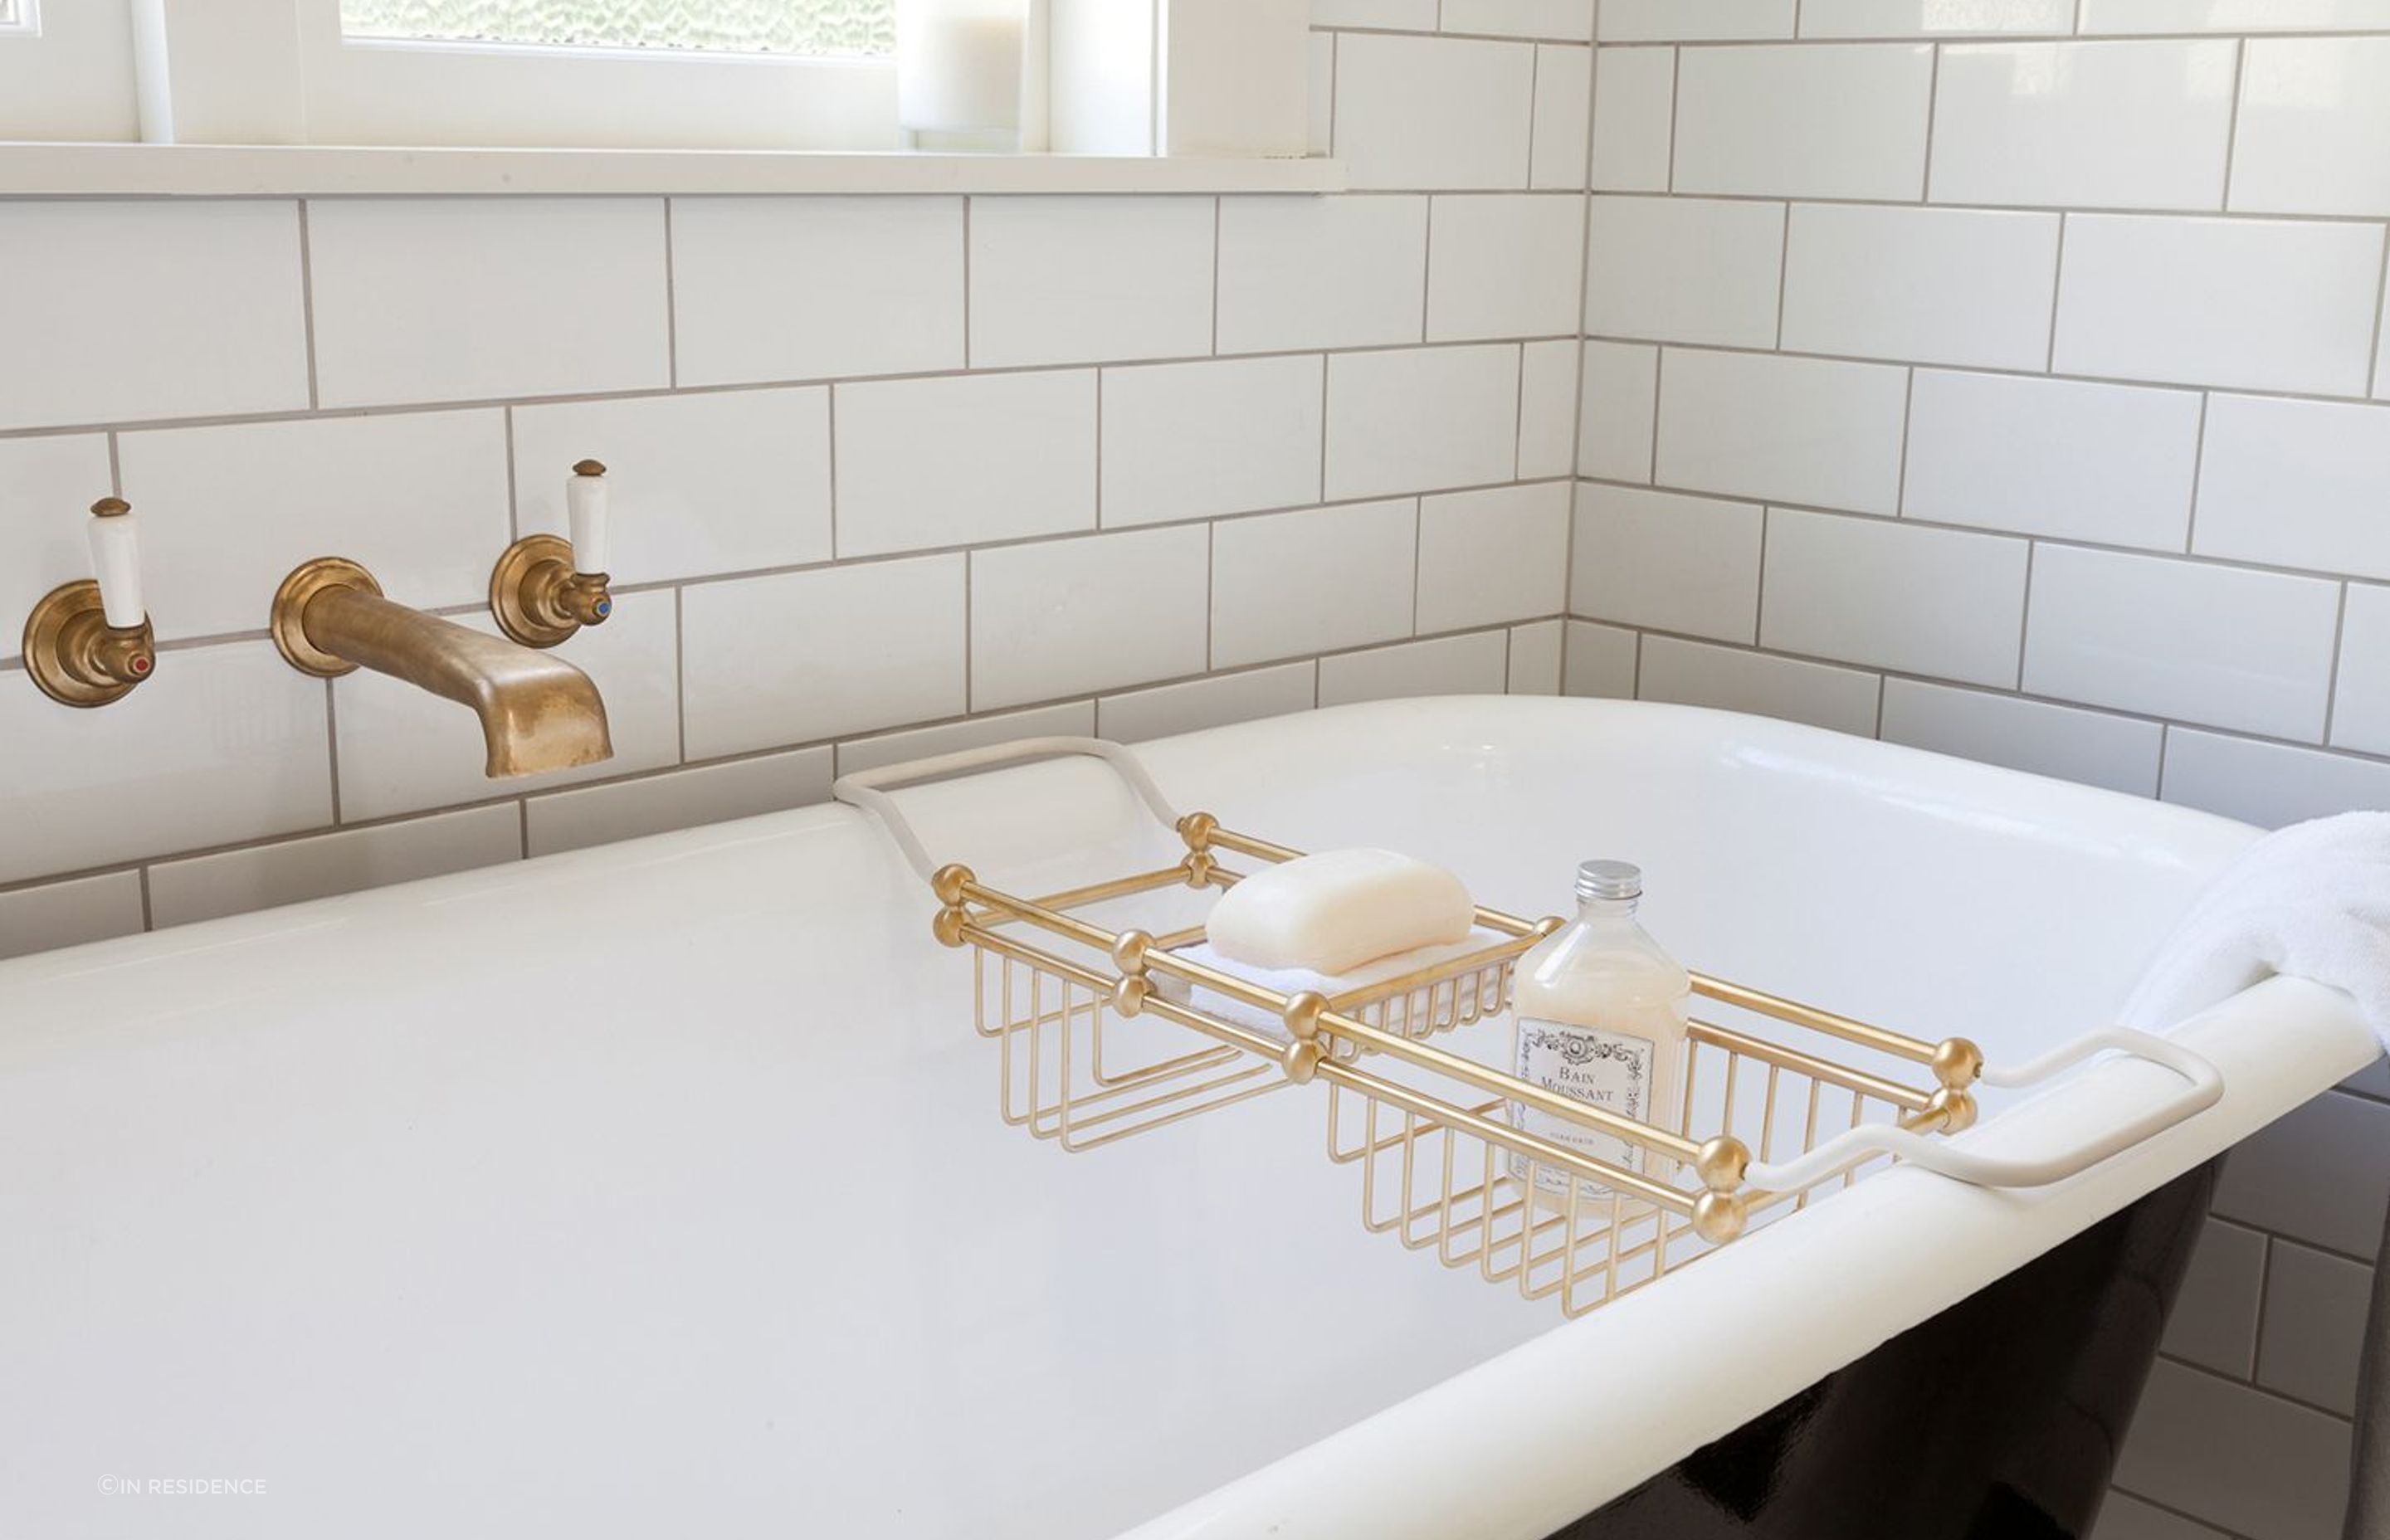 The Perrin &amp; Rowe Bath Rack comes with a soap dish and two deeper areas to accommodate all your bathroom essentials.